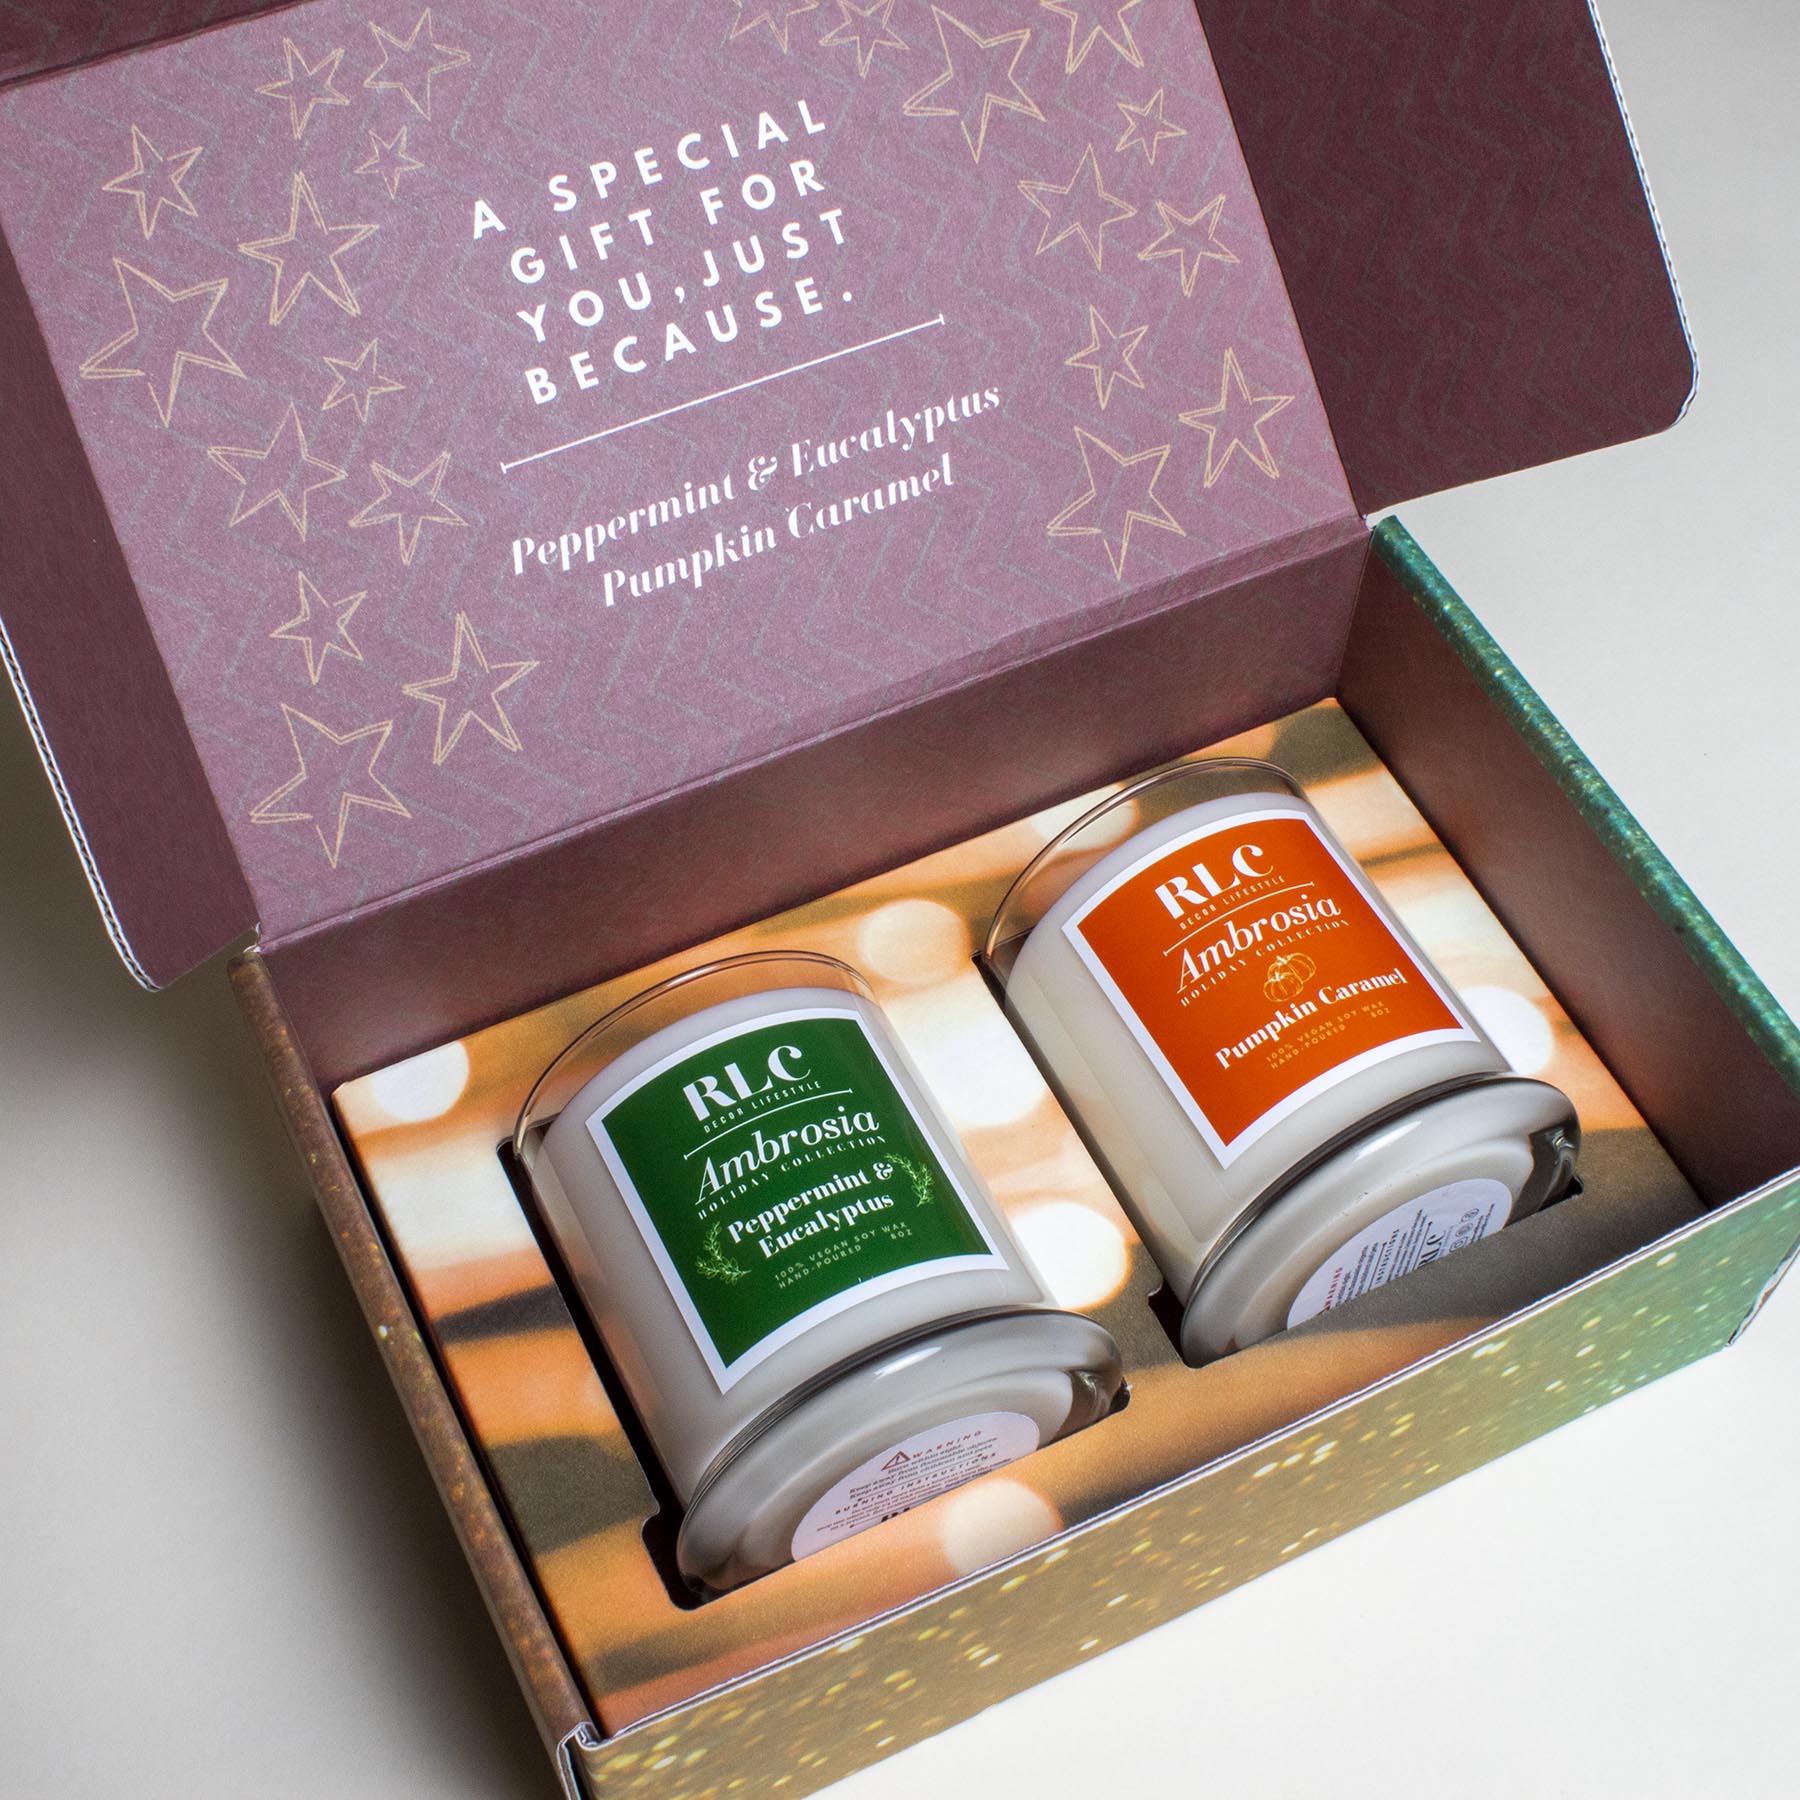 Candle lovers who love Pumpkin Caramel & Peppermint Eucalyptus scented candles will love this duo gift box set. This is a great holiday gift for gift-givers who are on the go! – RLC Decor Lifestyle